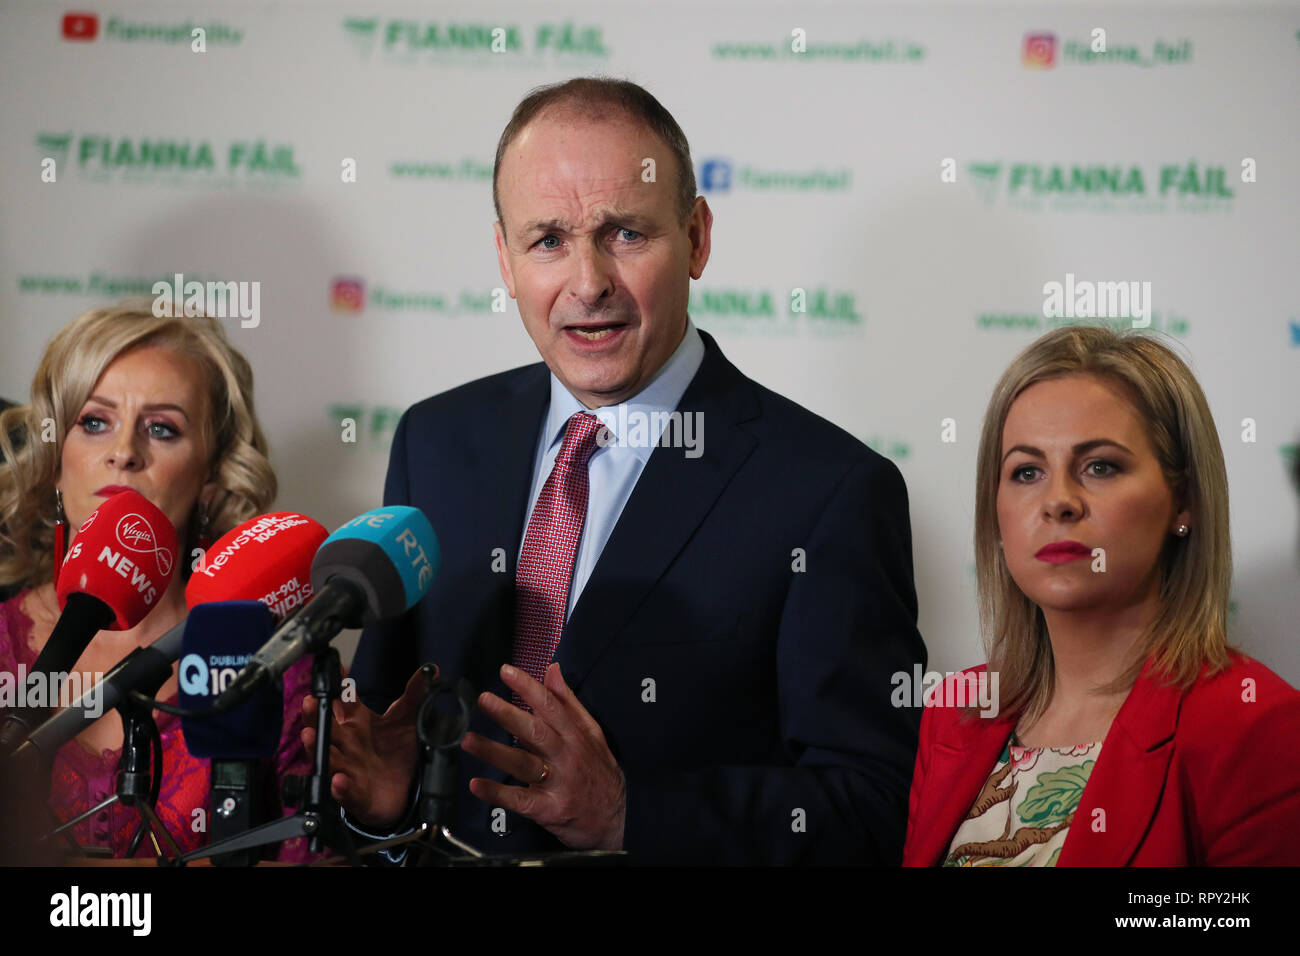 Fianna Fail leader Micheal Martin (centre) speaks to the press during his party's annual conference at the Citywest Hotel in Dublin. Stock Photo